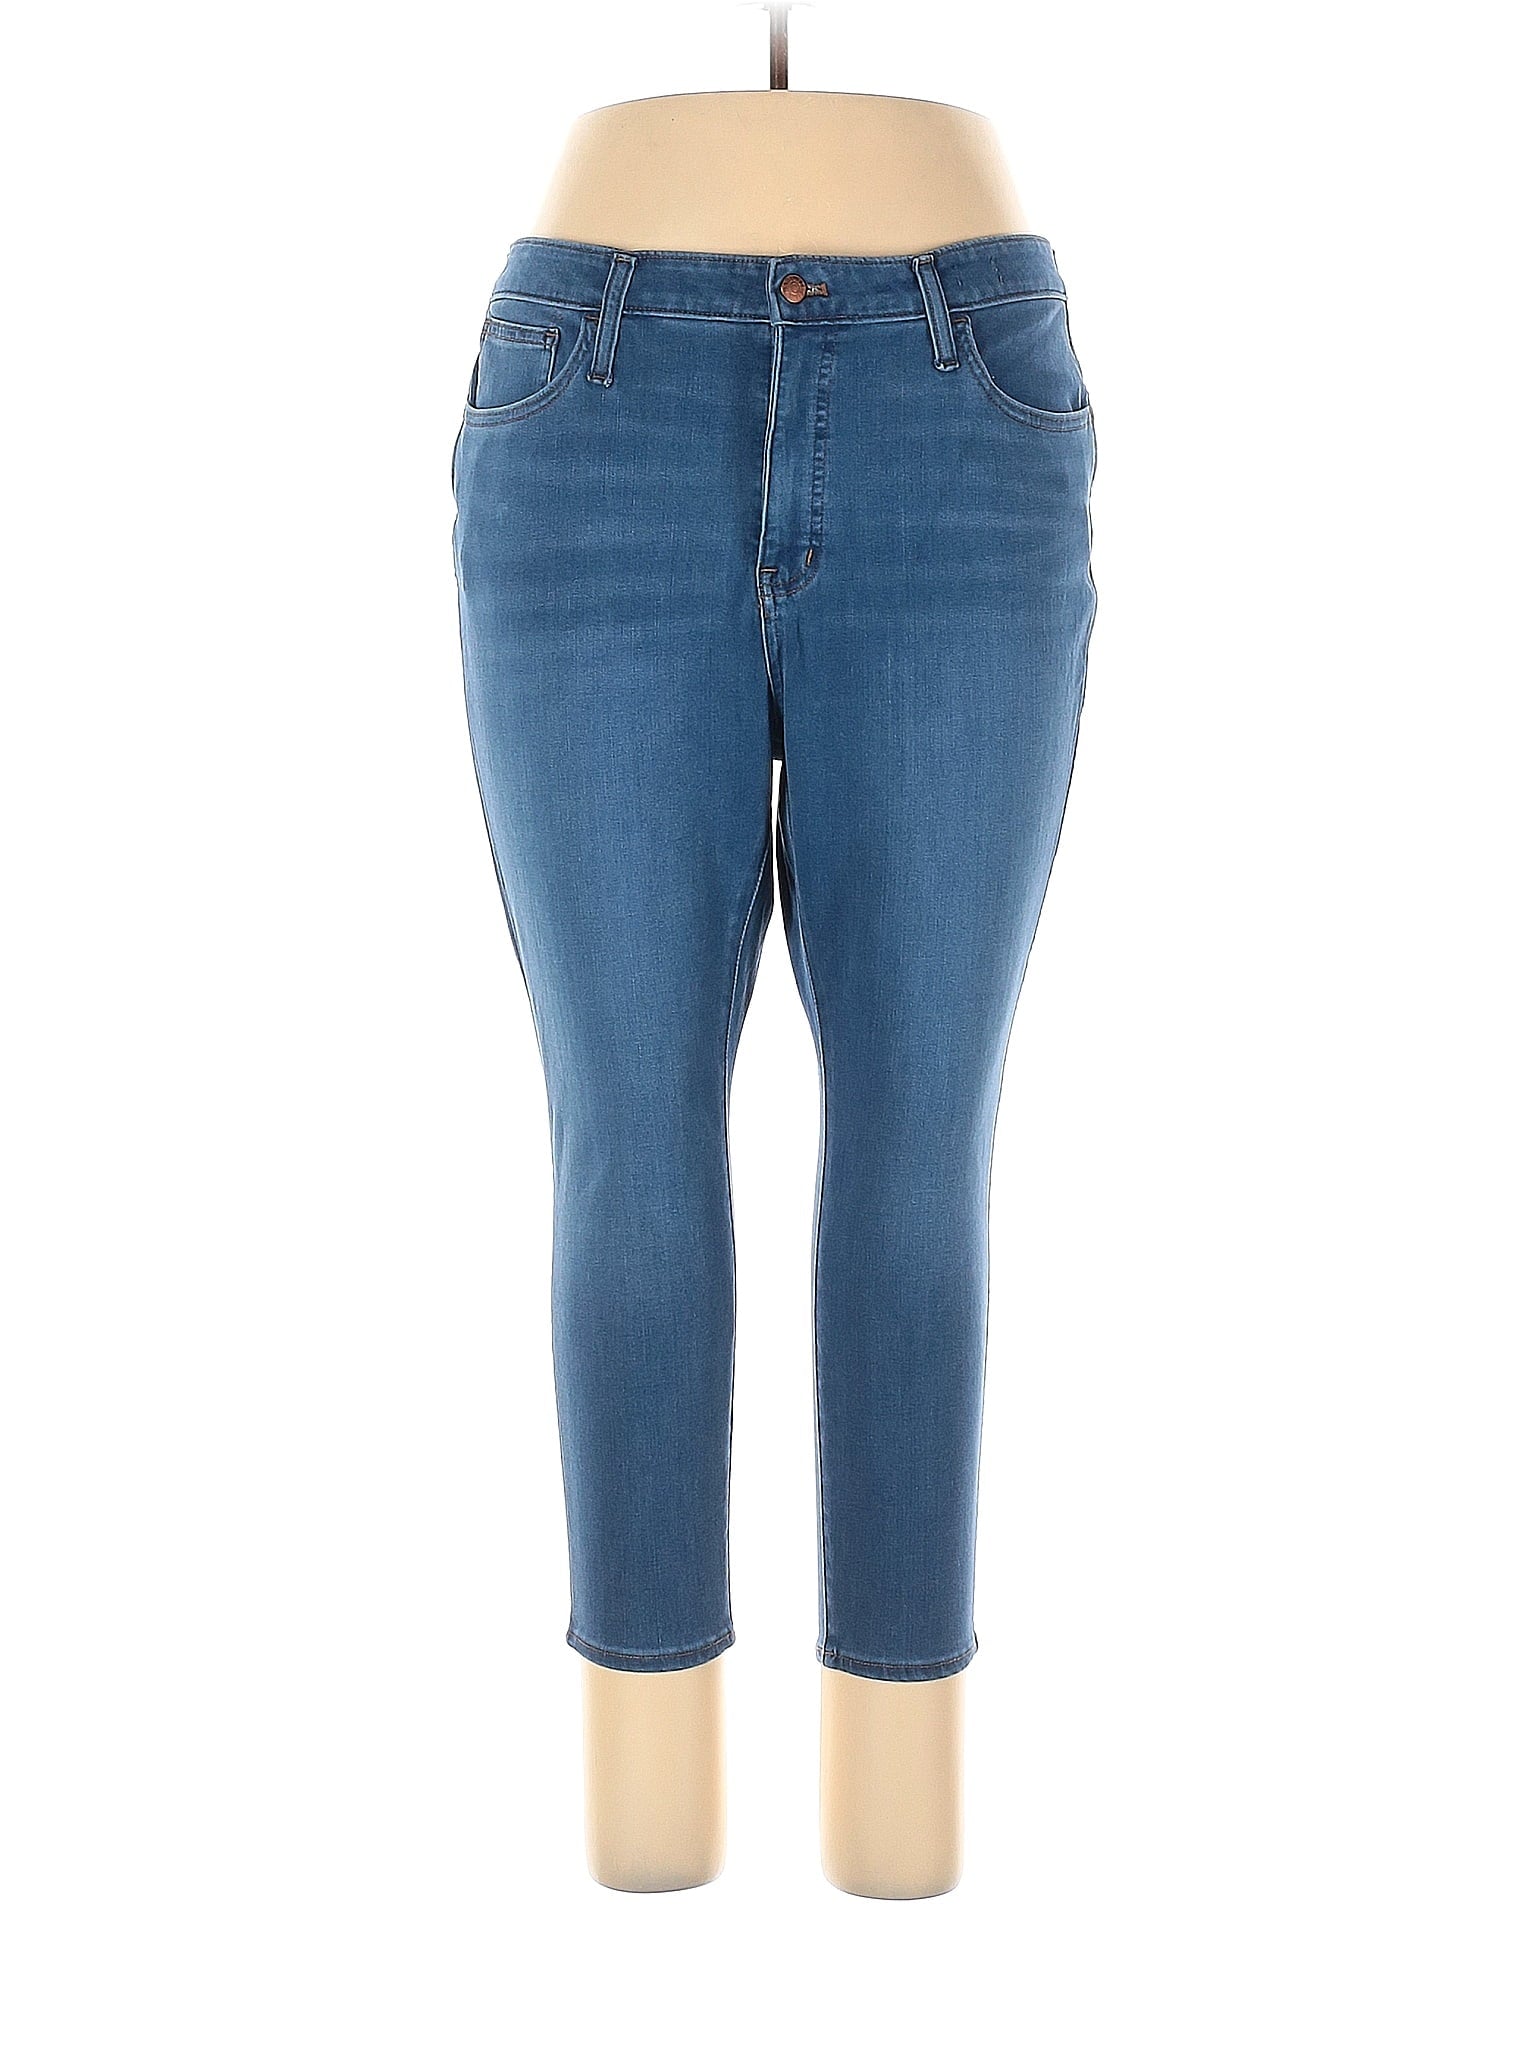 High-Rise Skinny Jeans in Medium Wash waist size - 33 P